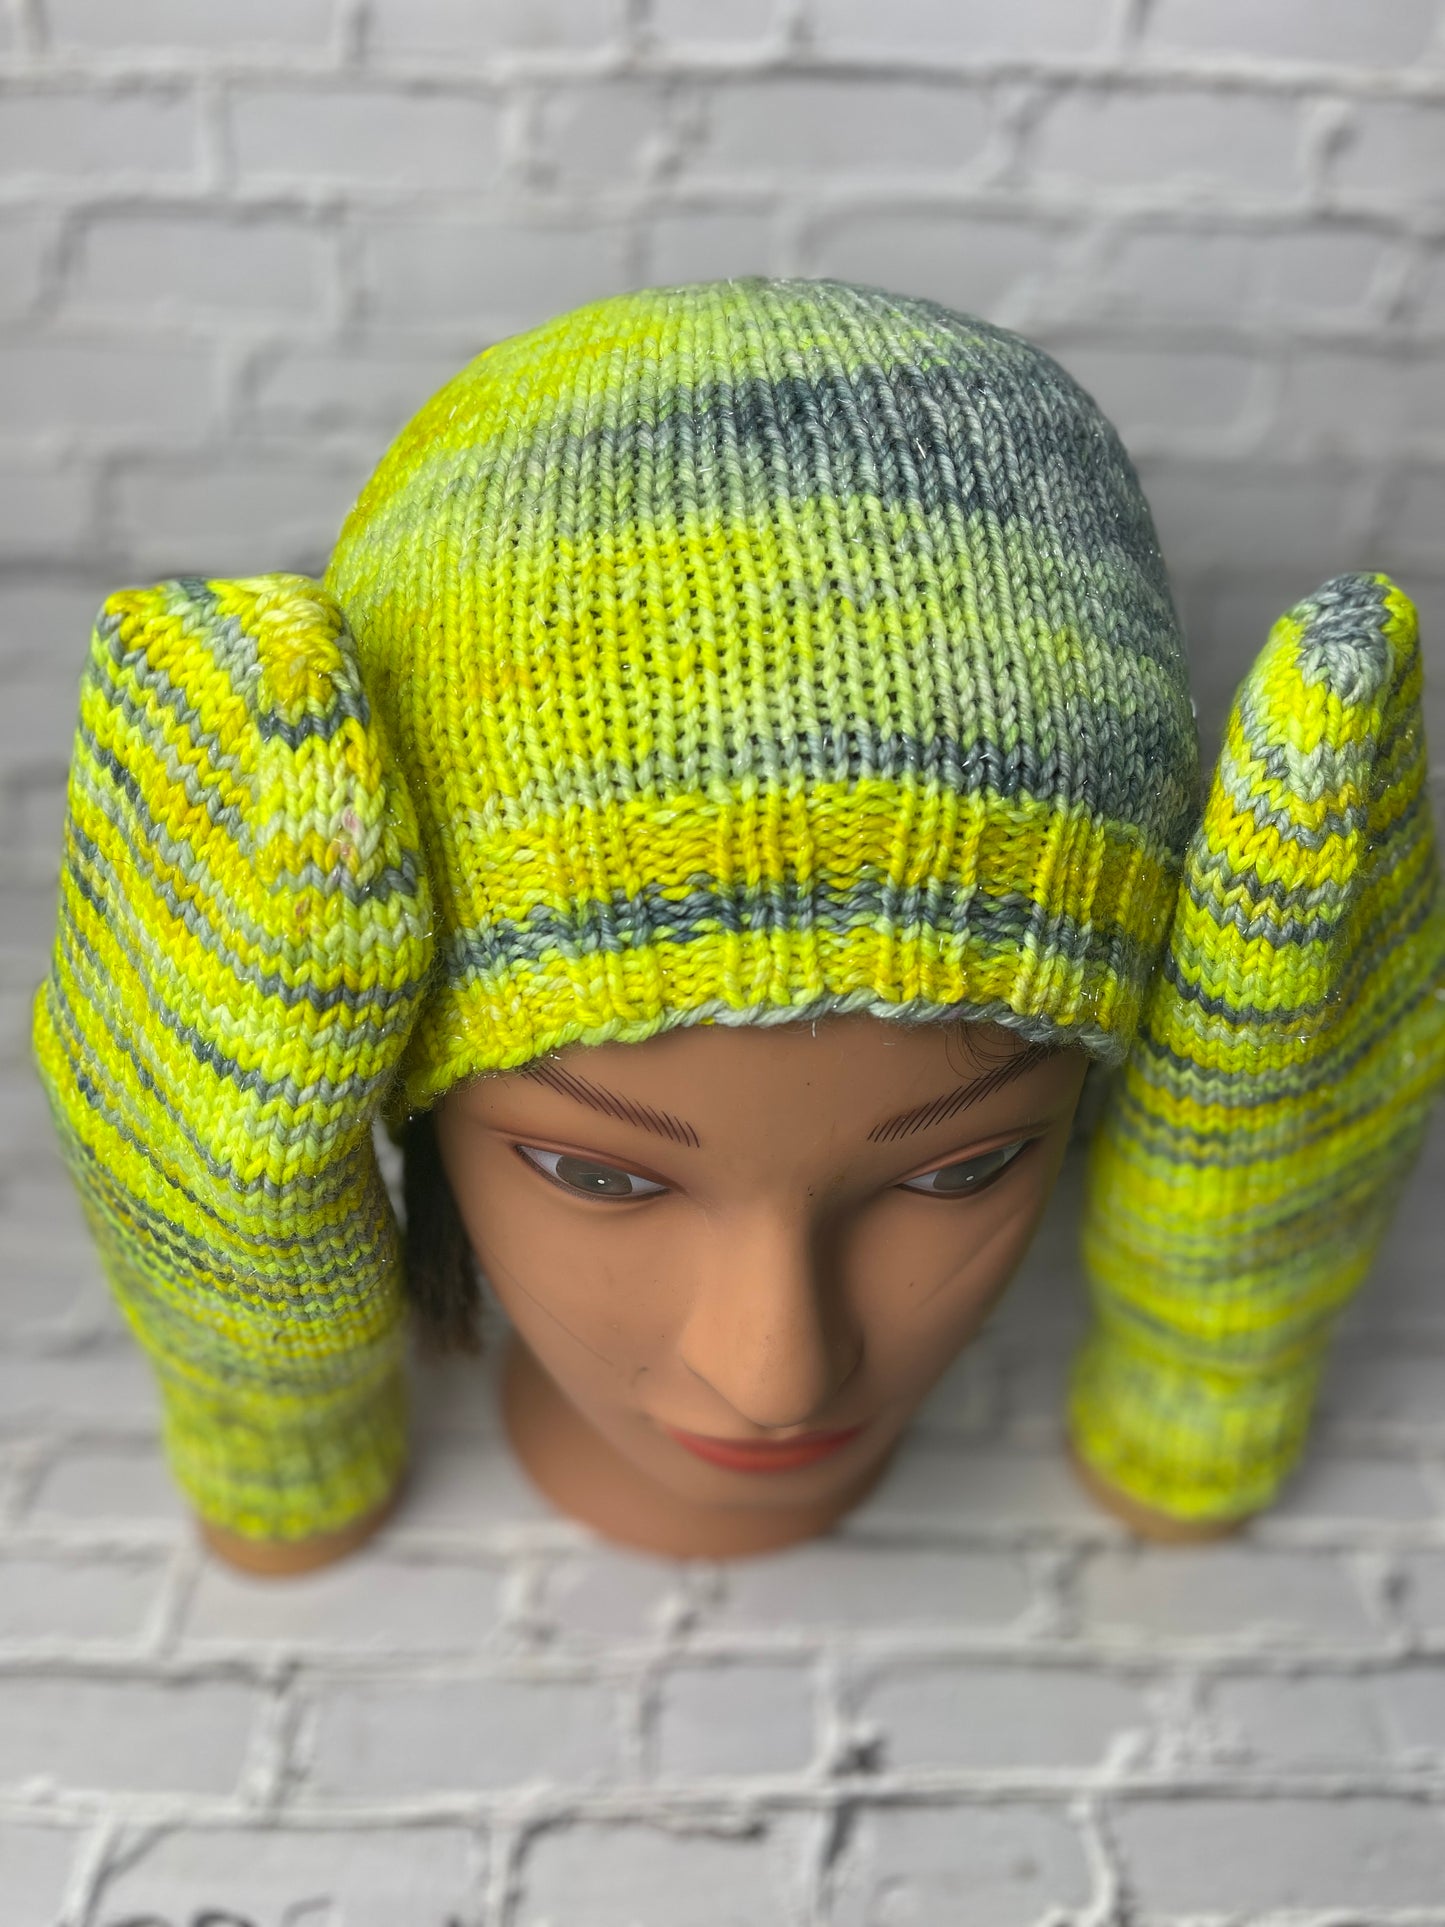 "When Life Gives You Lemons" on Various Yarn Bases